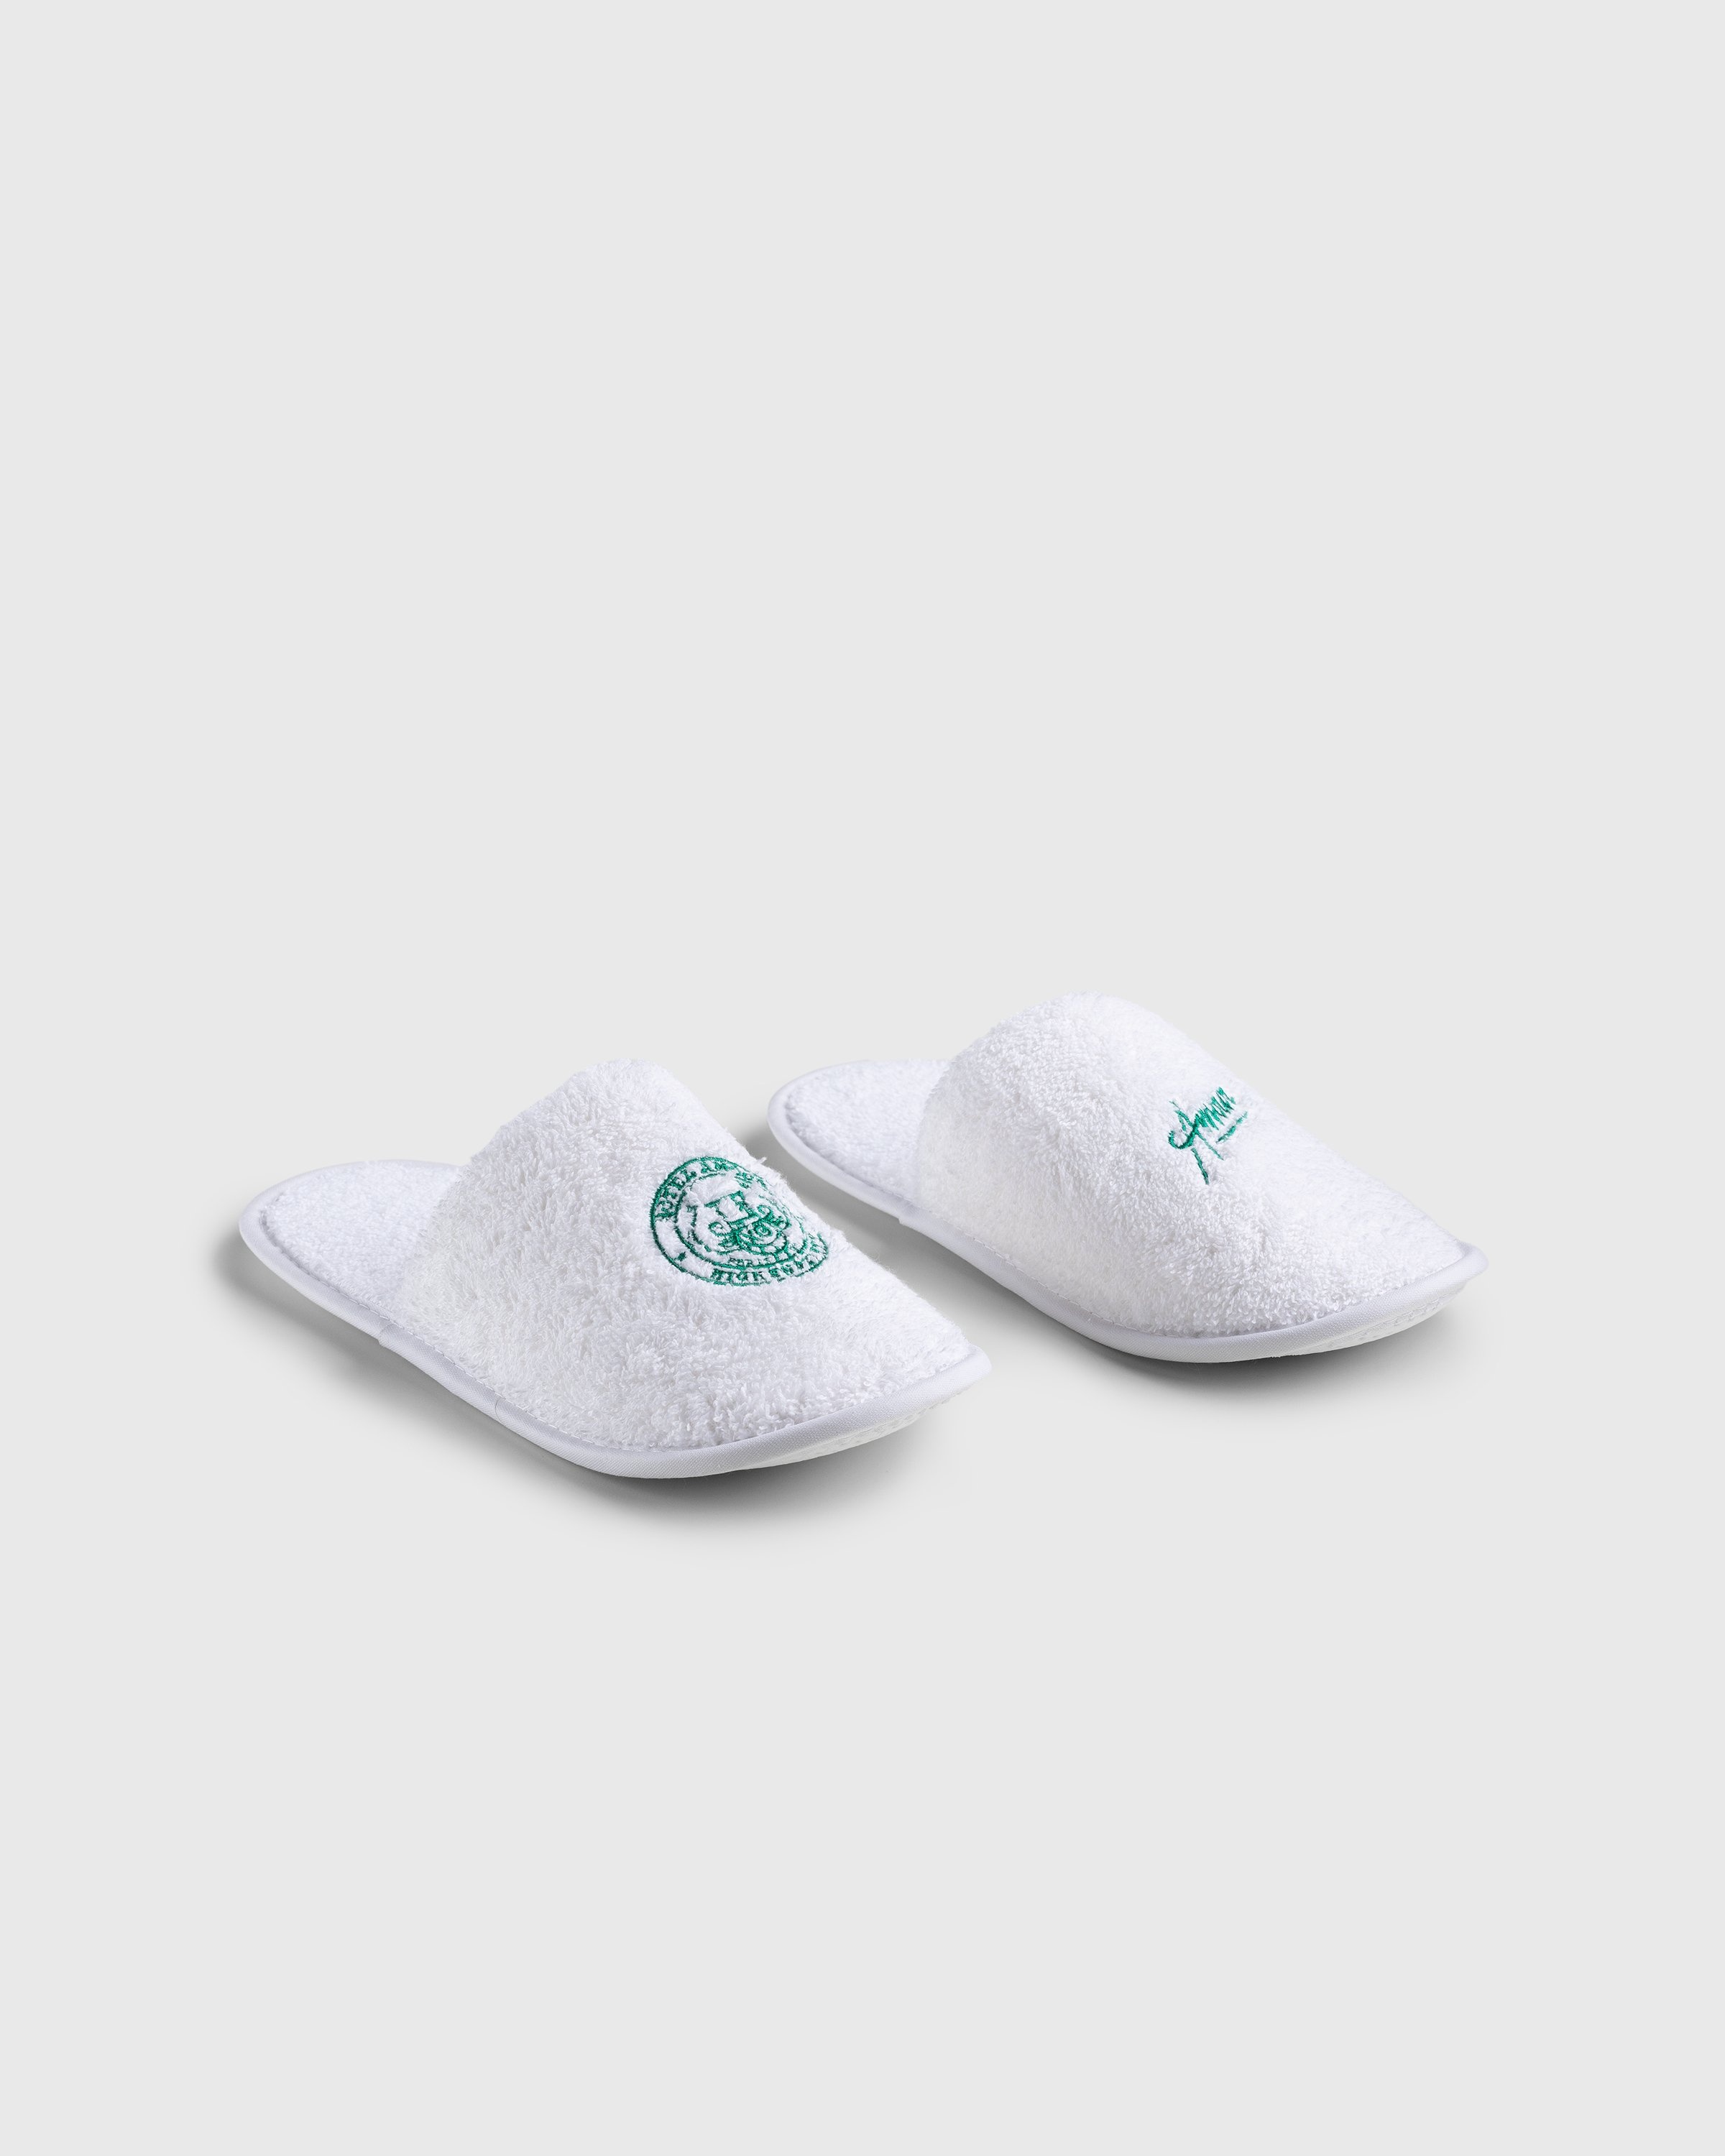 Hotel Amour x Highsnobiety – Not In Paris 4 Slippers White - Slippers - White - Image 4